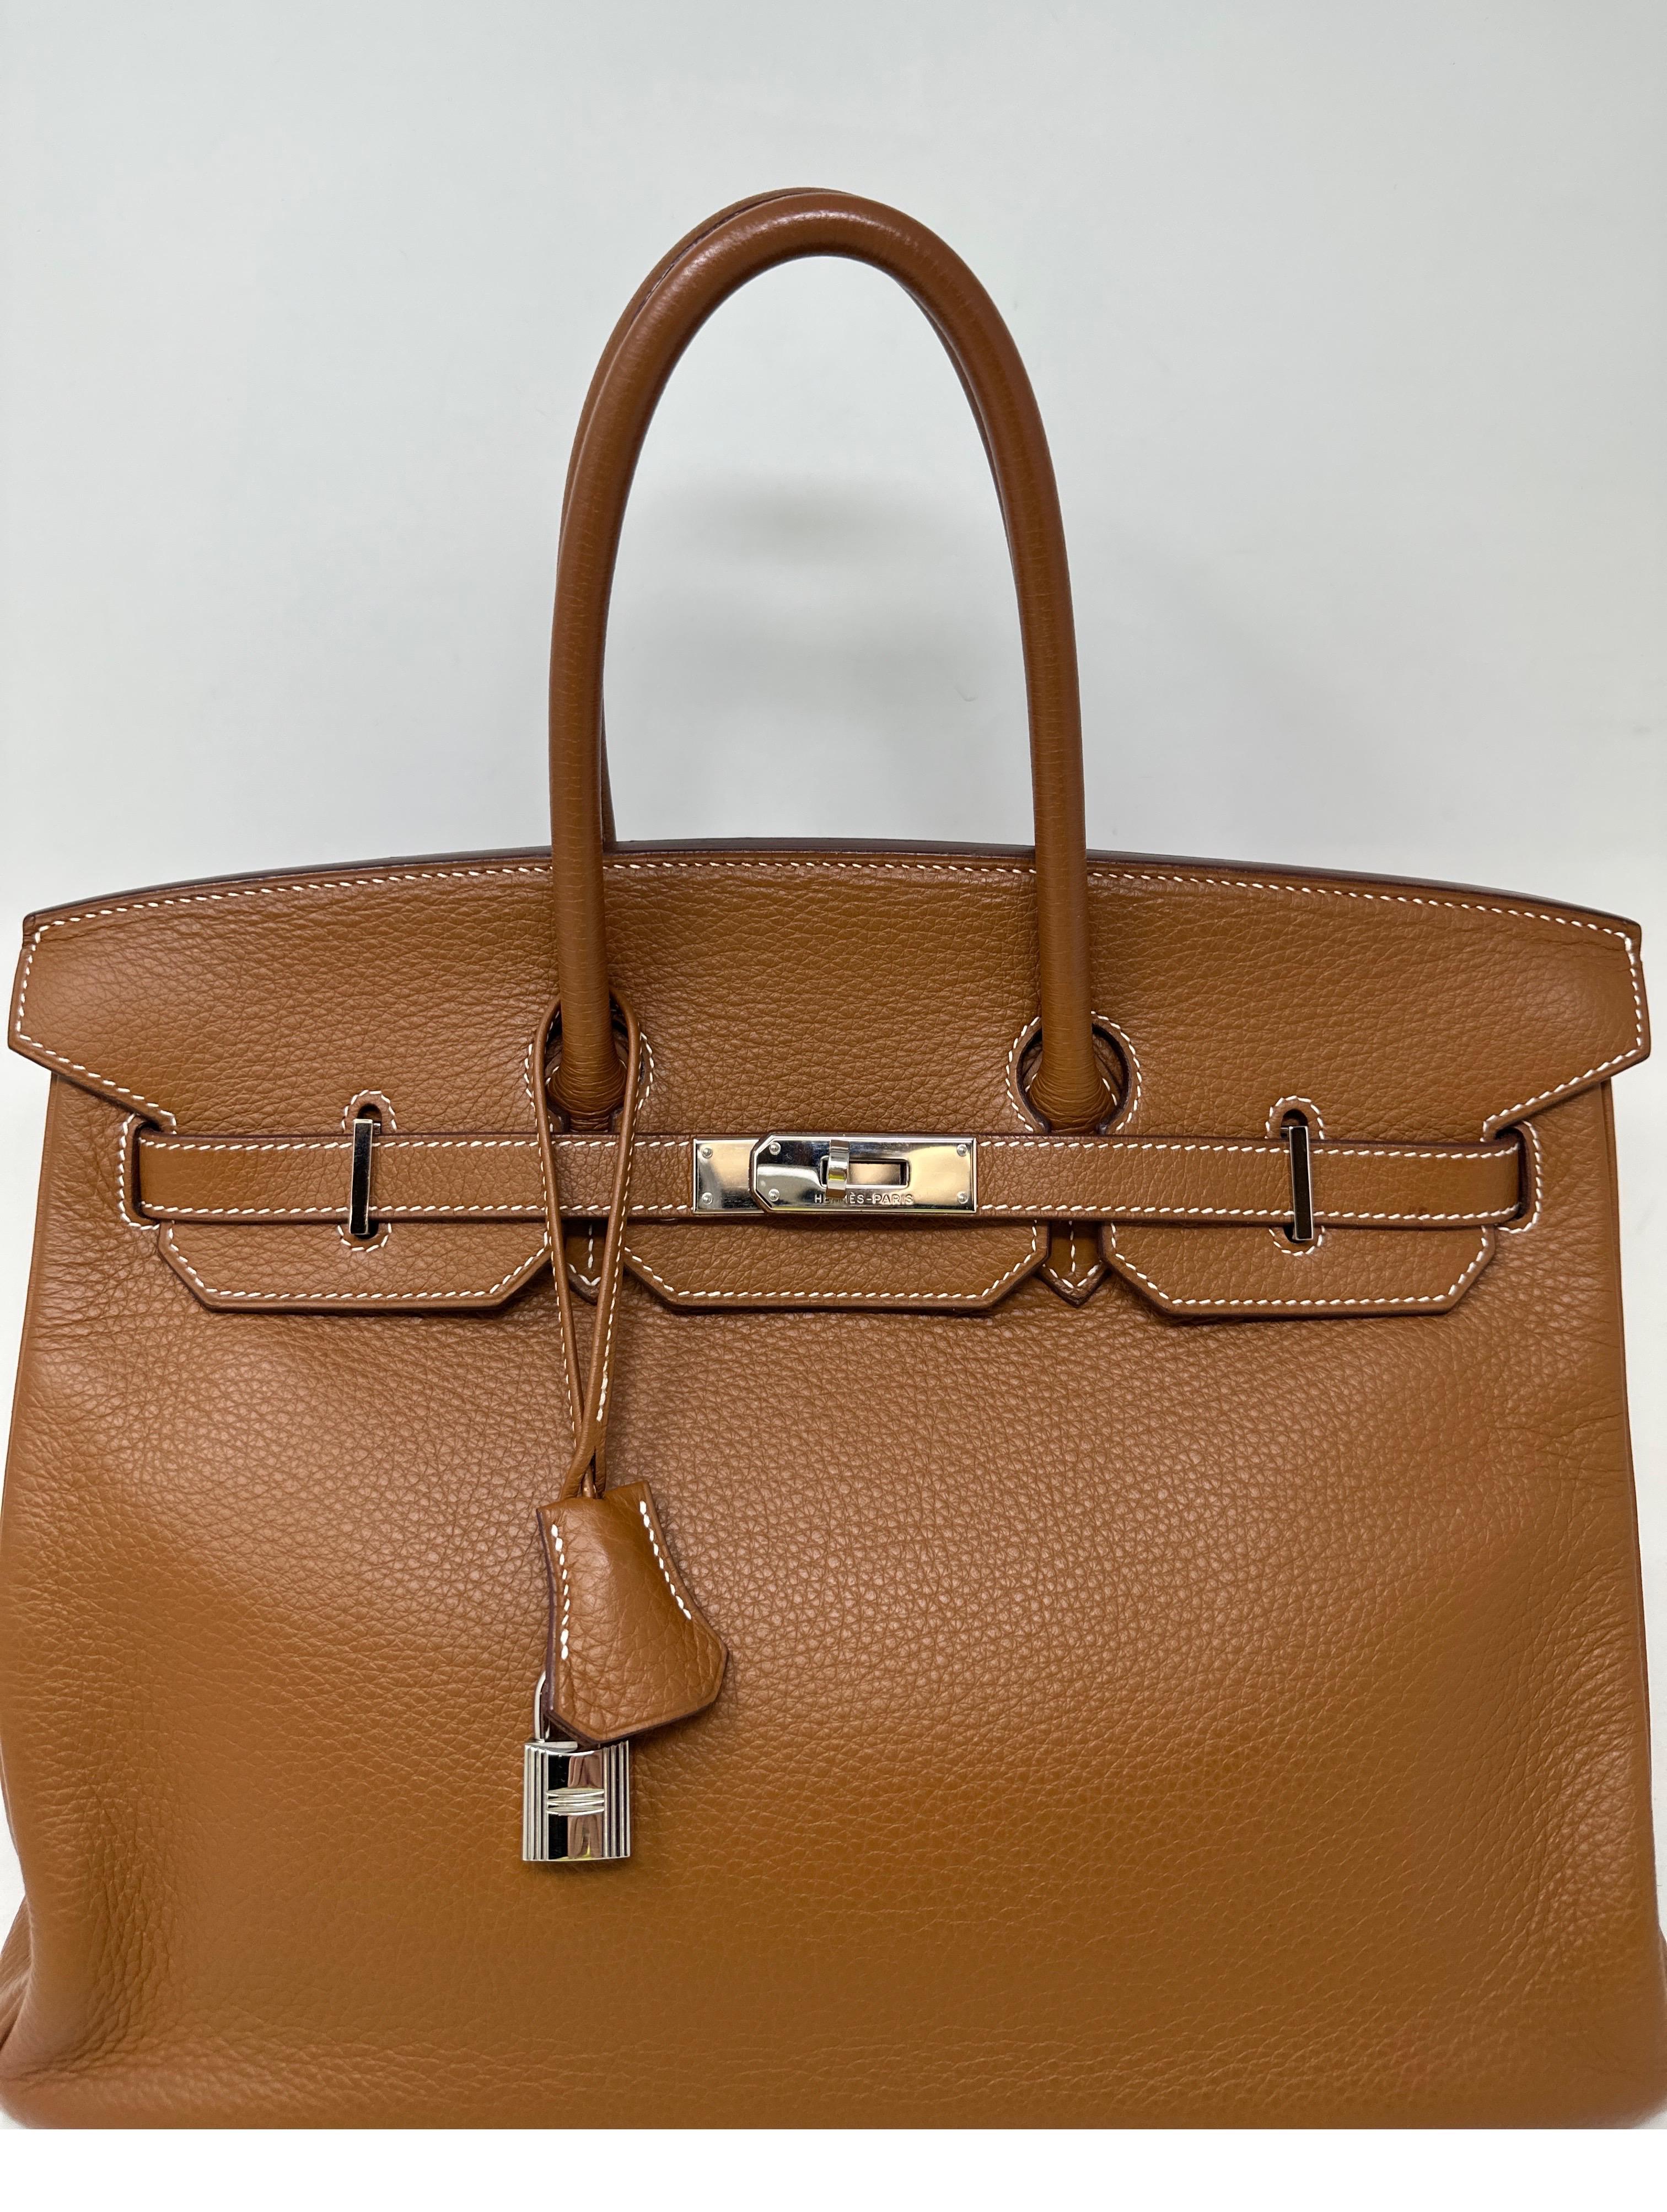 Hermes Gold Birkin 35 Bag. Palladium silver hardware. Excellent condition. Interior clean. Gold tan color leather. Classic bag. Great investment bag. Includes clochette, lock, keys, and dust bag. Guaranteed authentic. 